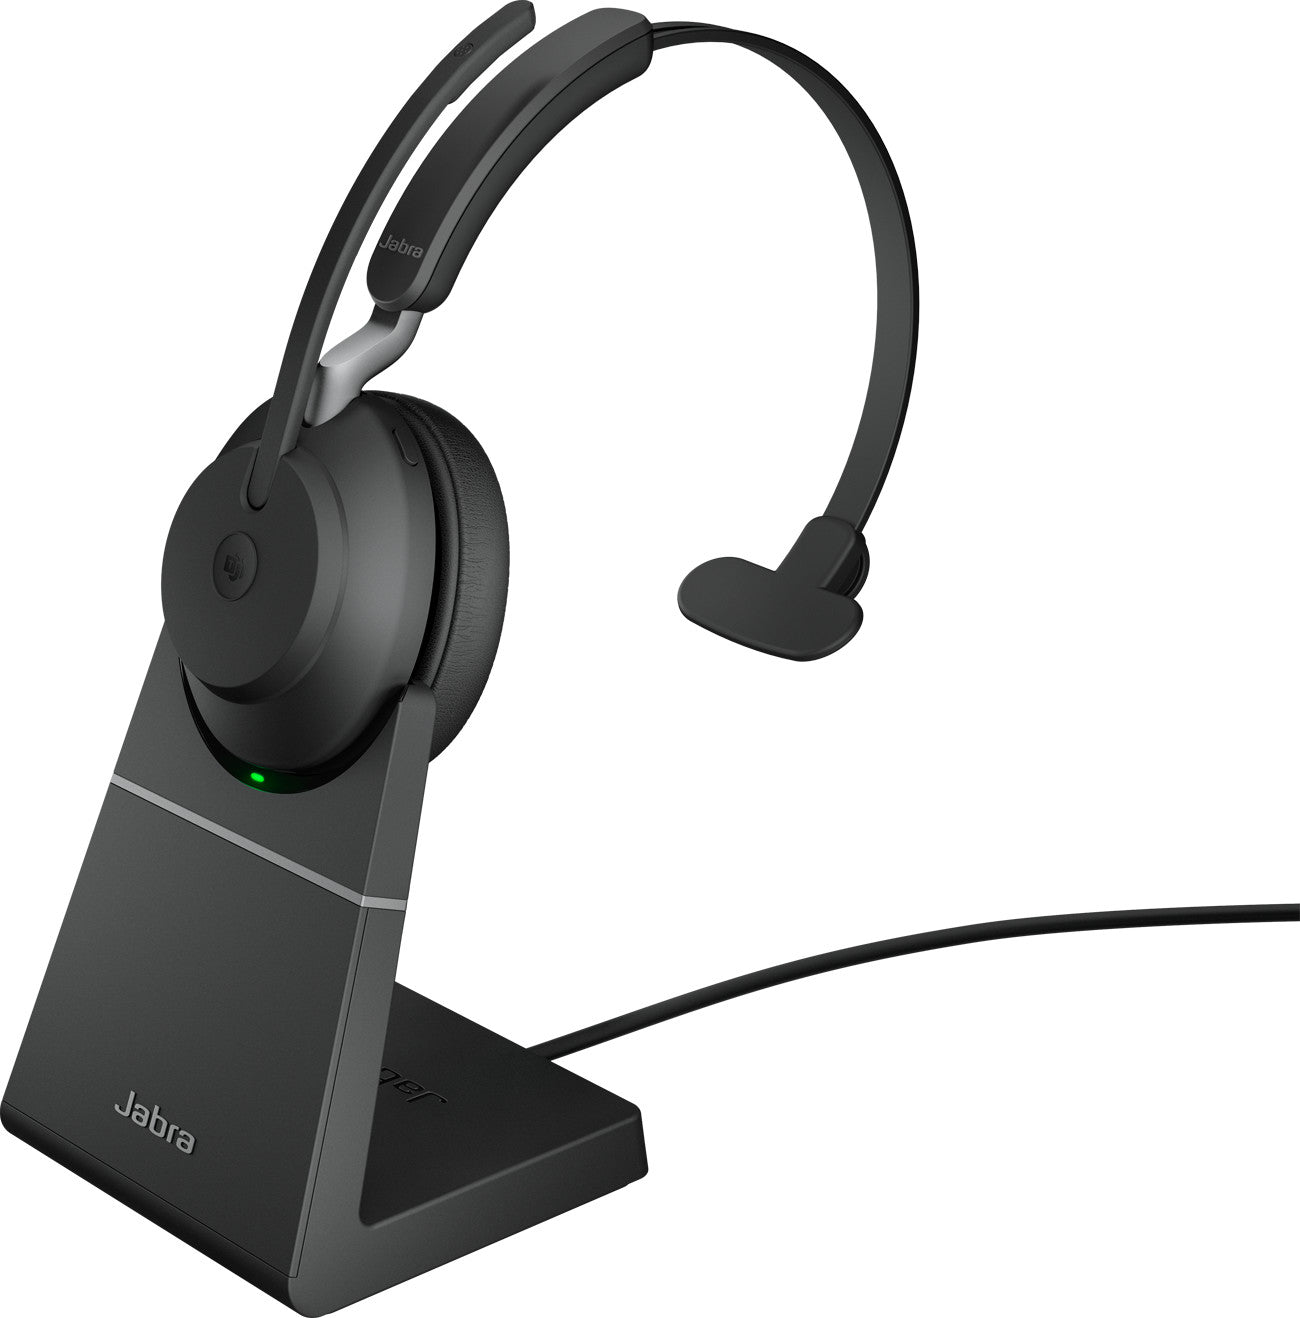 Evolve2 65 - MS Mono Headset - With charging stand